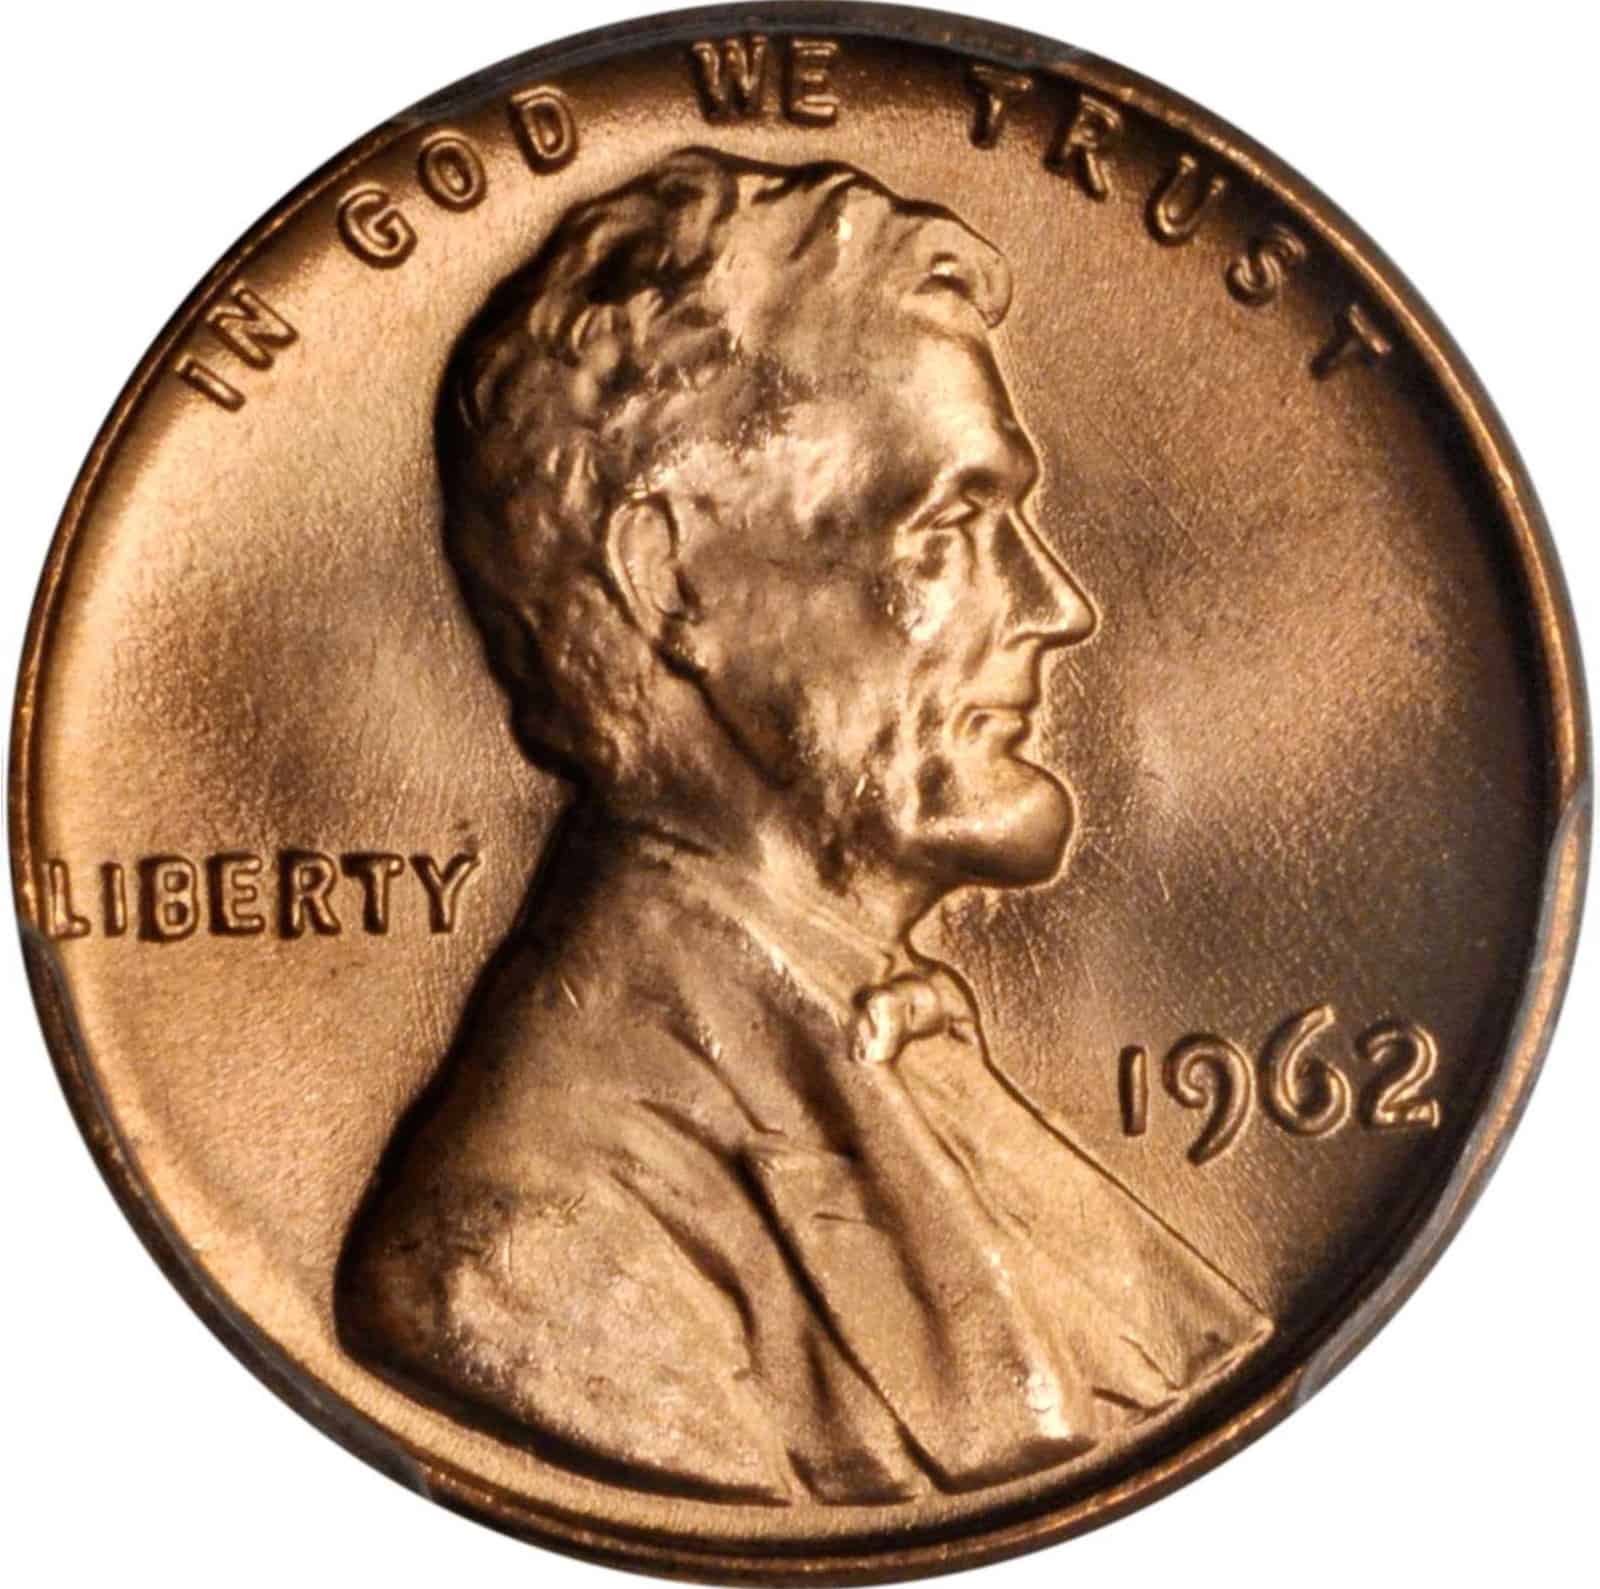 The obverse of the 1962 Lincoln penny